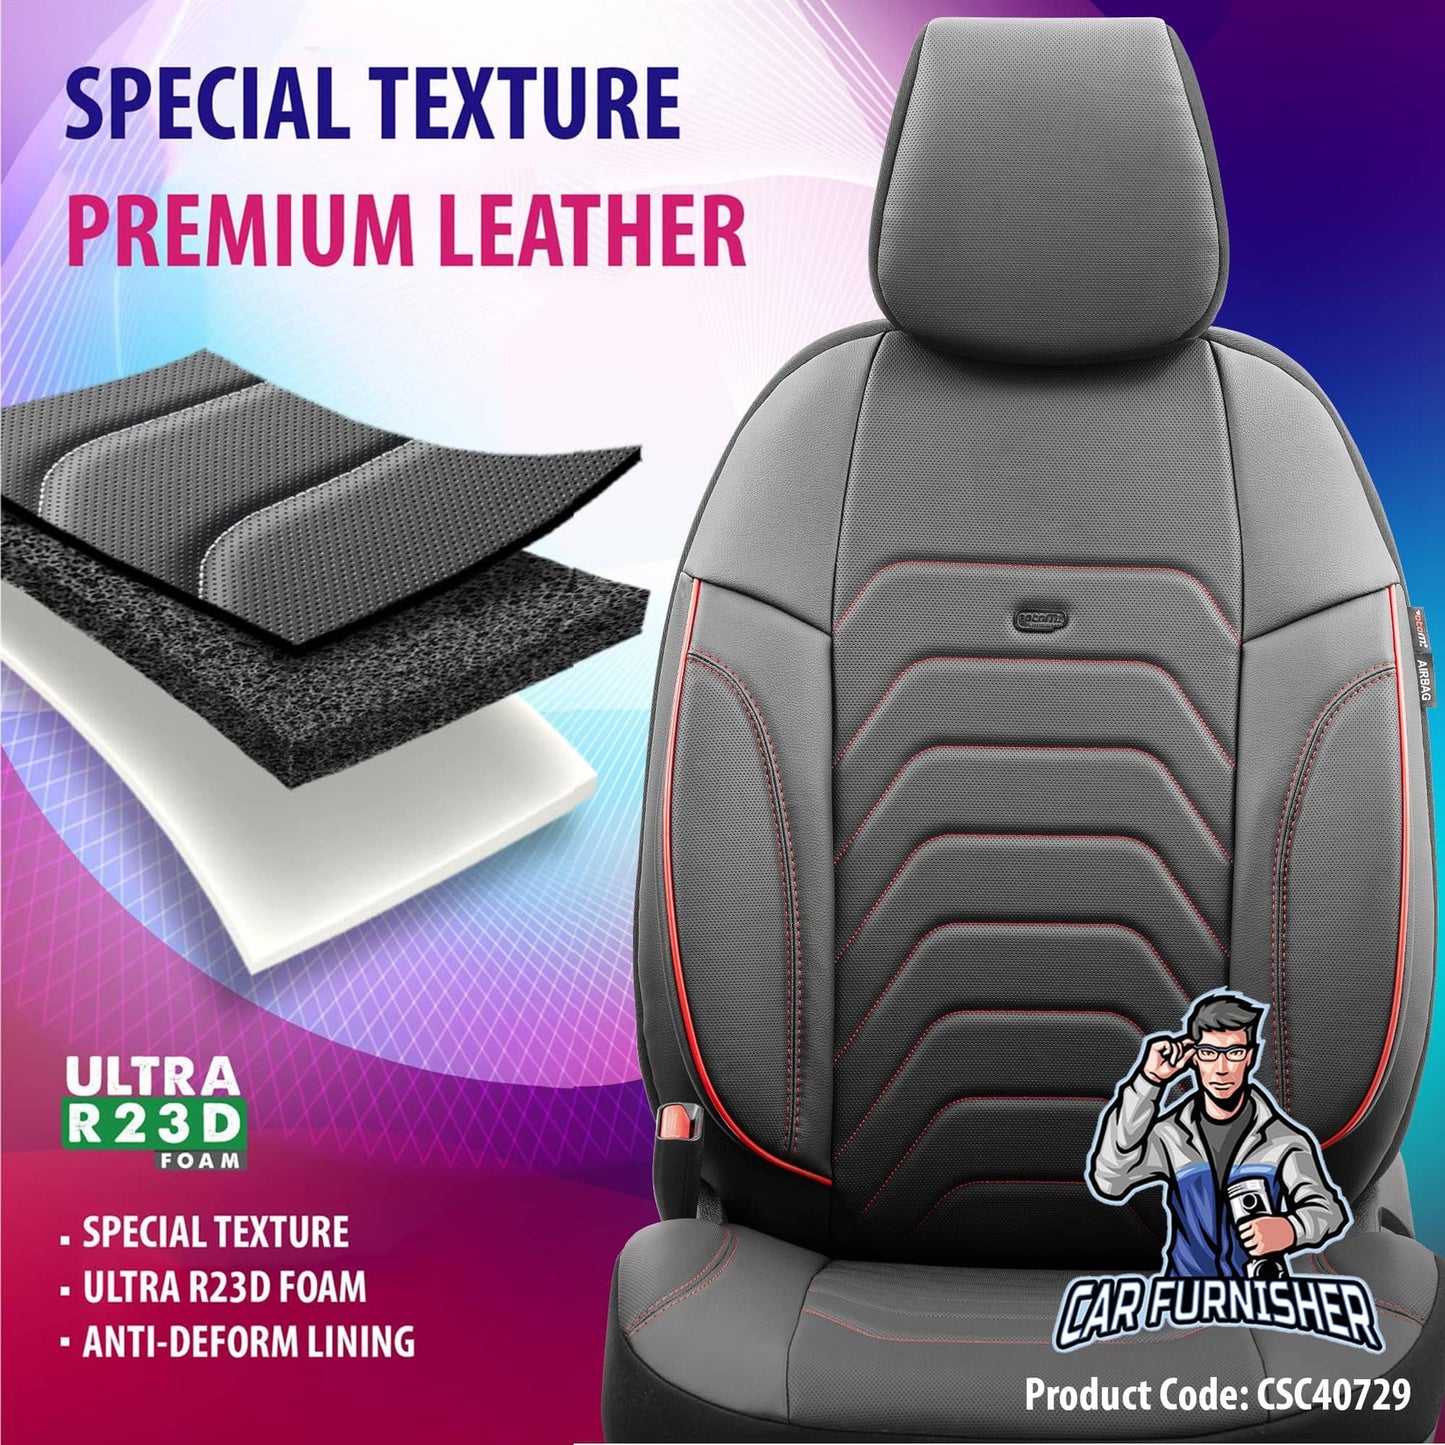 Luxury Car Seat Cover Set (2 Colors) | Core Series Red Leather & Fabric